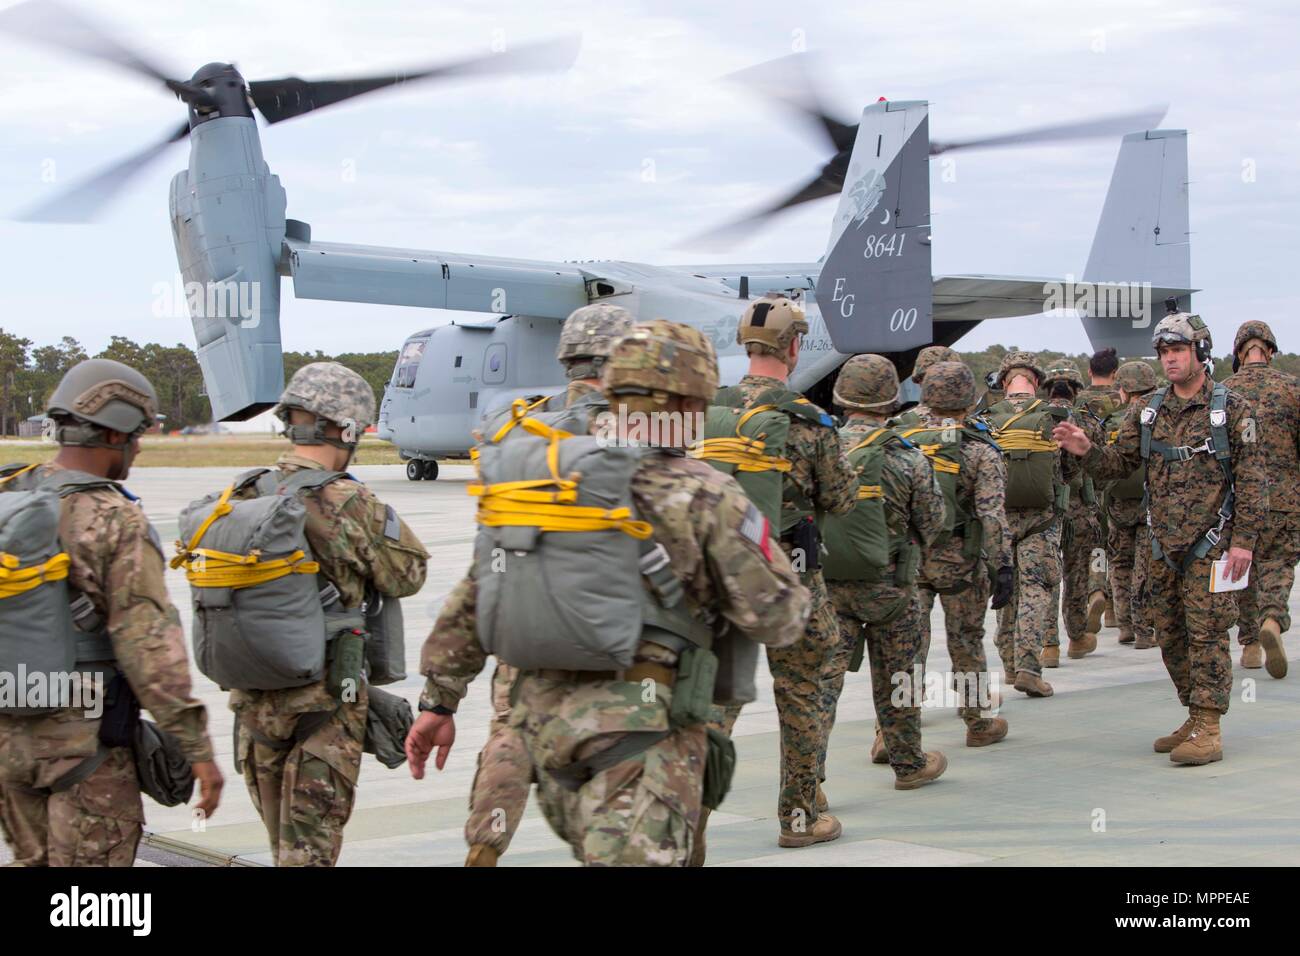 Marines and Soldiers board an MV-22B Osprey during an air-drop delivery jump exercise at Marine Corps Auxiliary Landing Field Bogue, N.C., March 27, 2017. The training was part of field exercise Bold Bronco 17, which allowed the Marines to demonstrate their transportation support skills in various environments. The Marines are with 2nd Transportation Support Battalion, 2nd Marine Logistics Group and the Soldiers are with 647th Quartermaster Company, 3rd Expeditionary Sustainment Command. (U.S. Marine Corps photo by Sgt. Clemente C. Garcia) Stock Photo